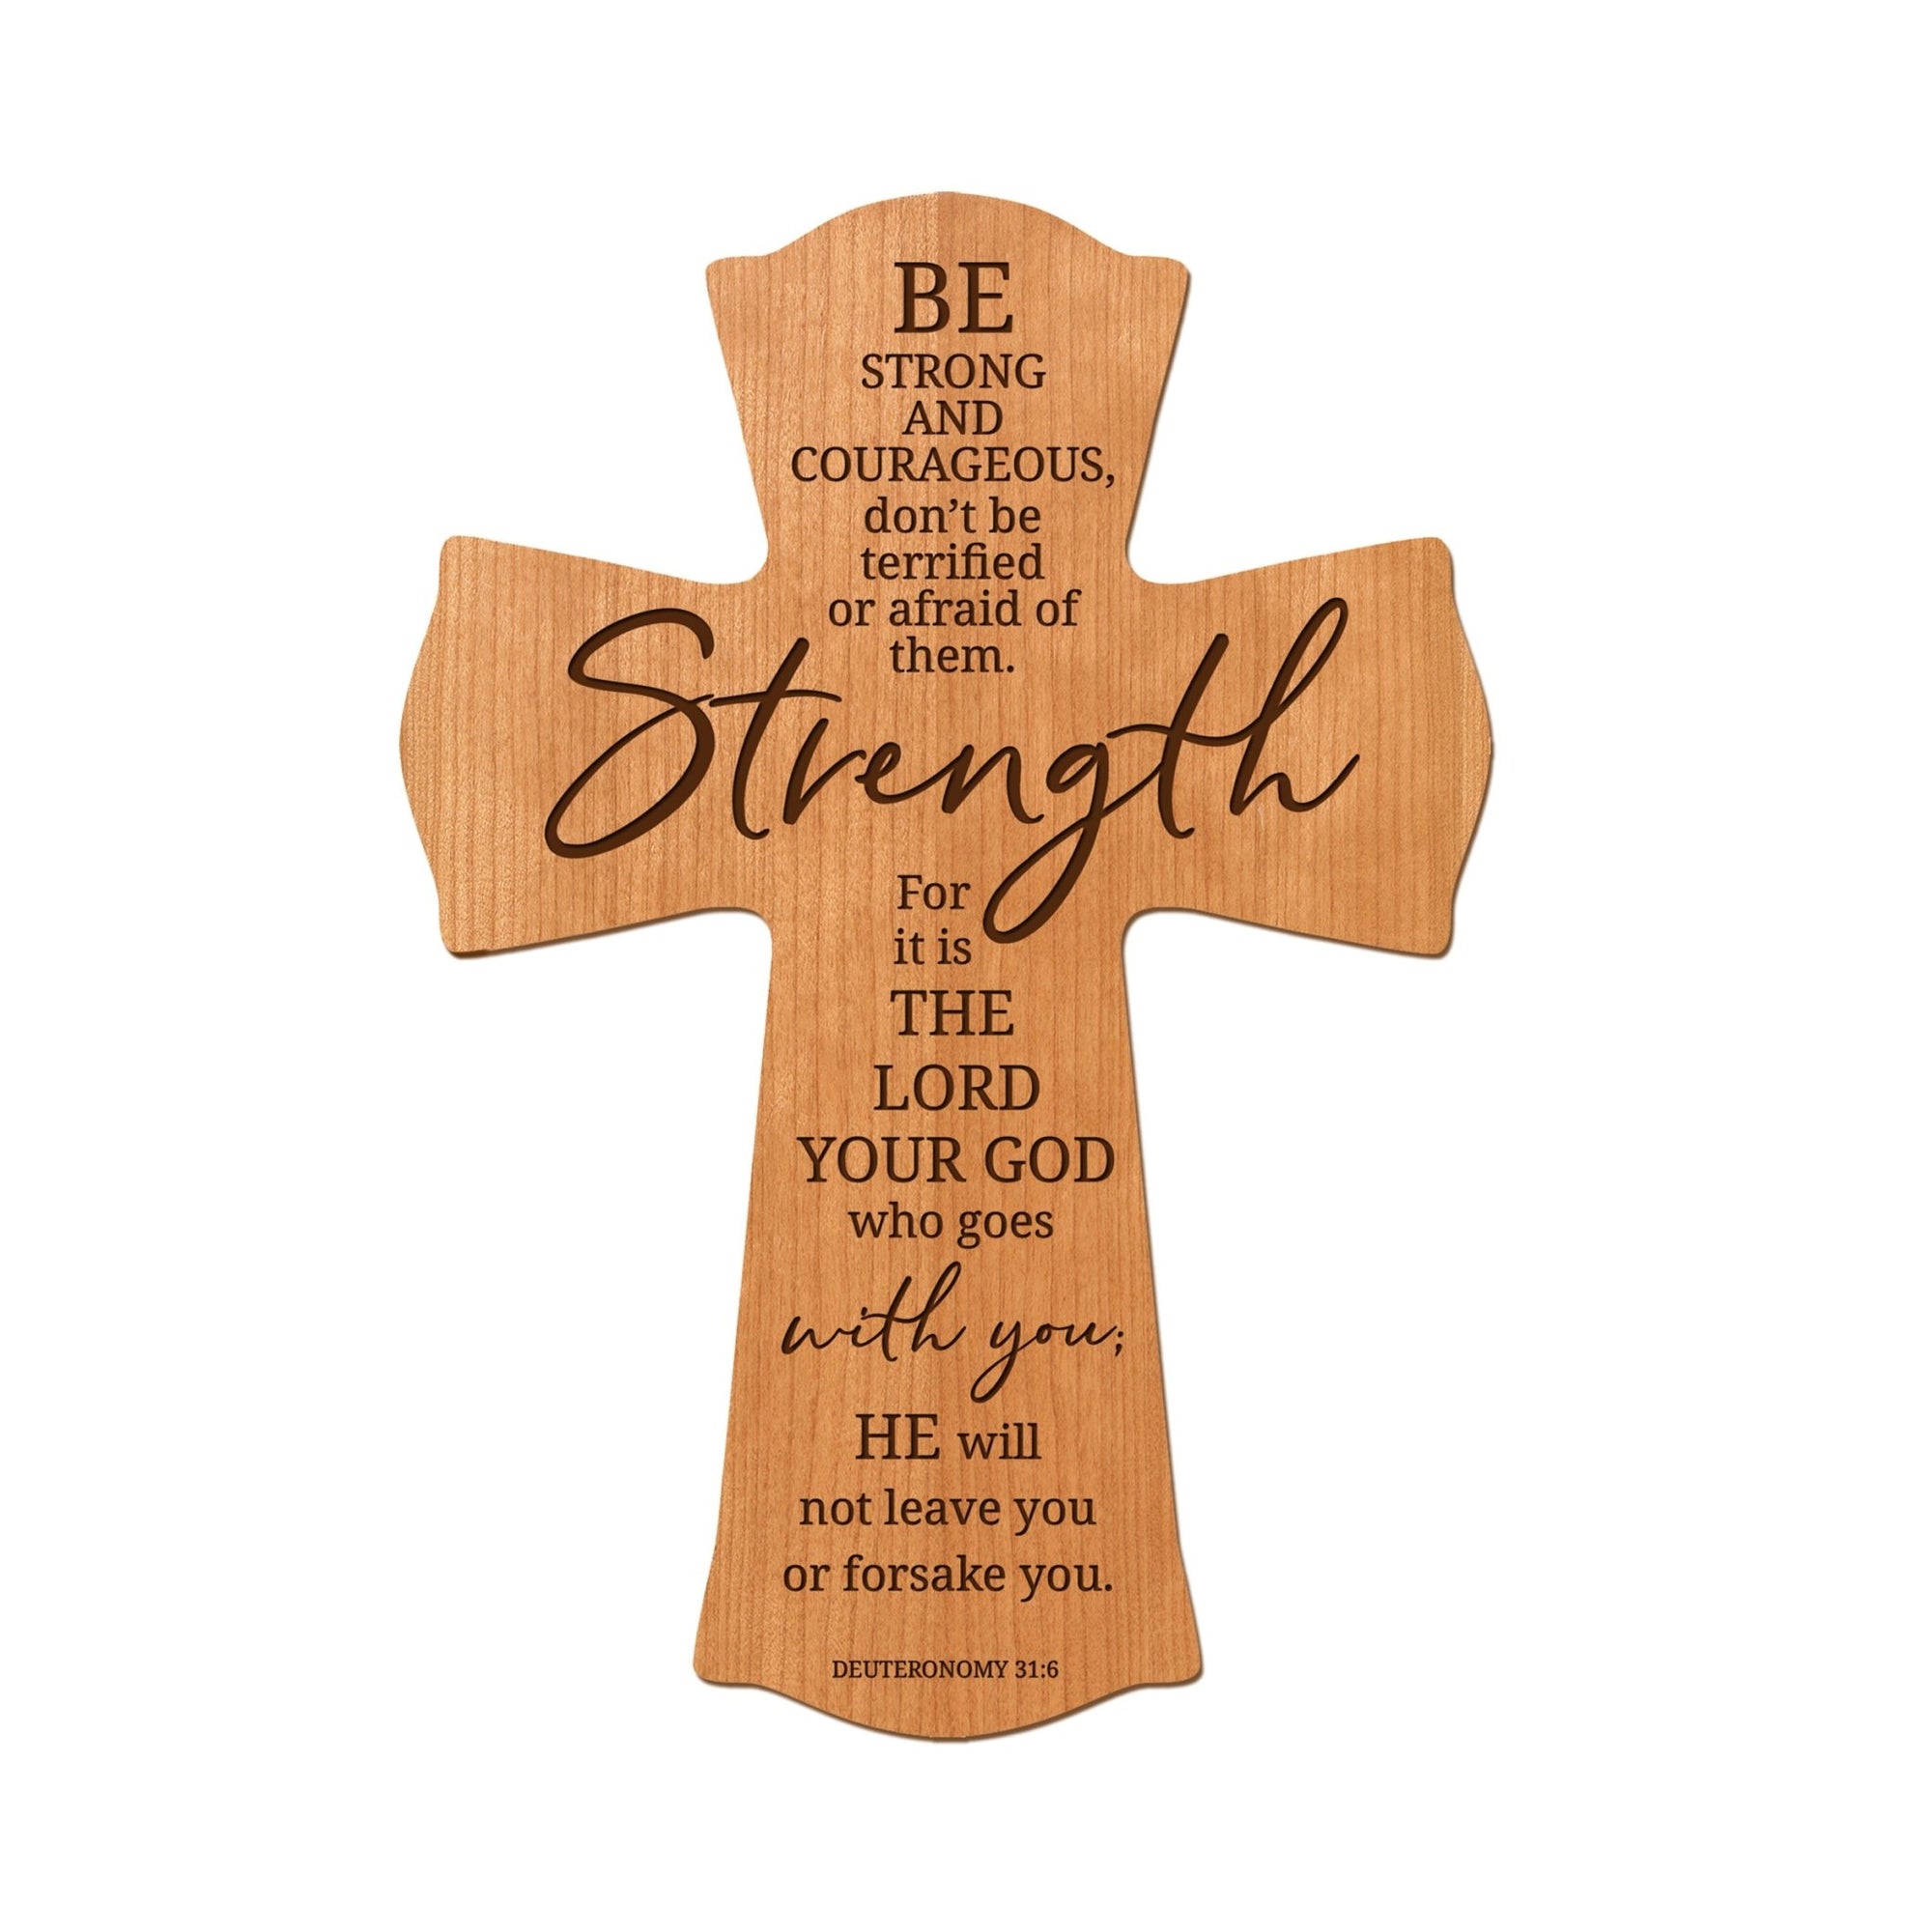 Every Day Wall Cross 8” x 11.25” - Be Strong and Courageous - LifeSong Milestones